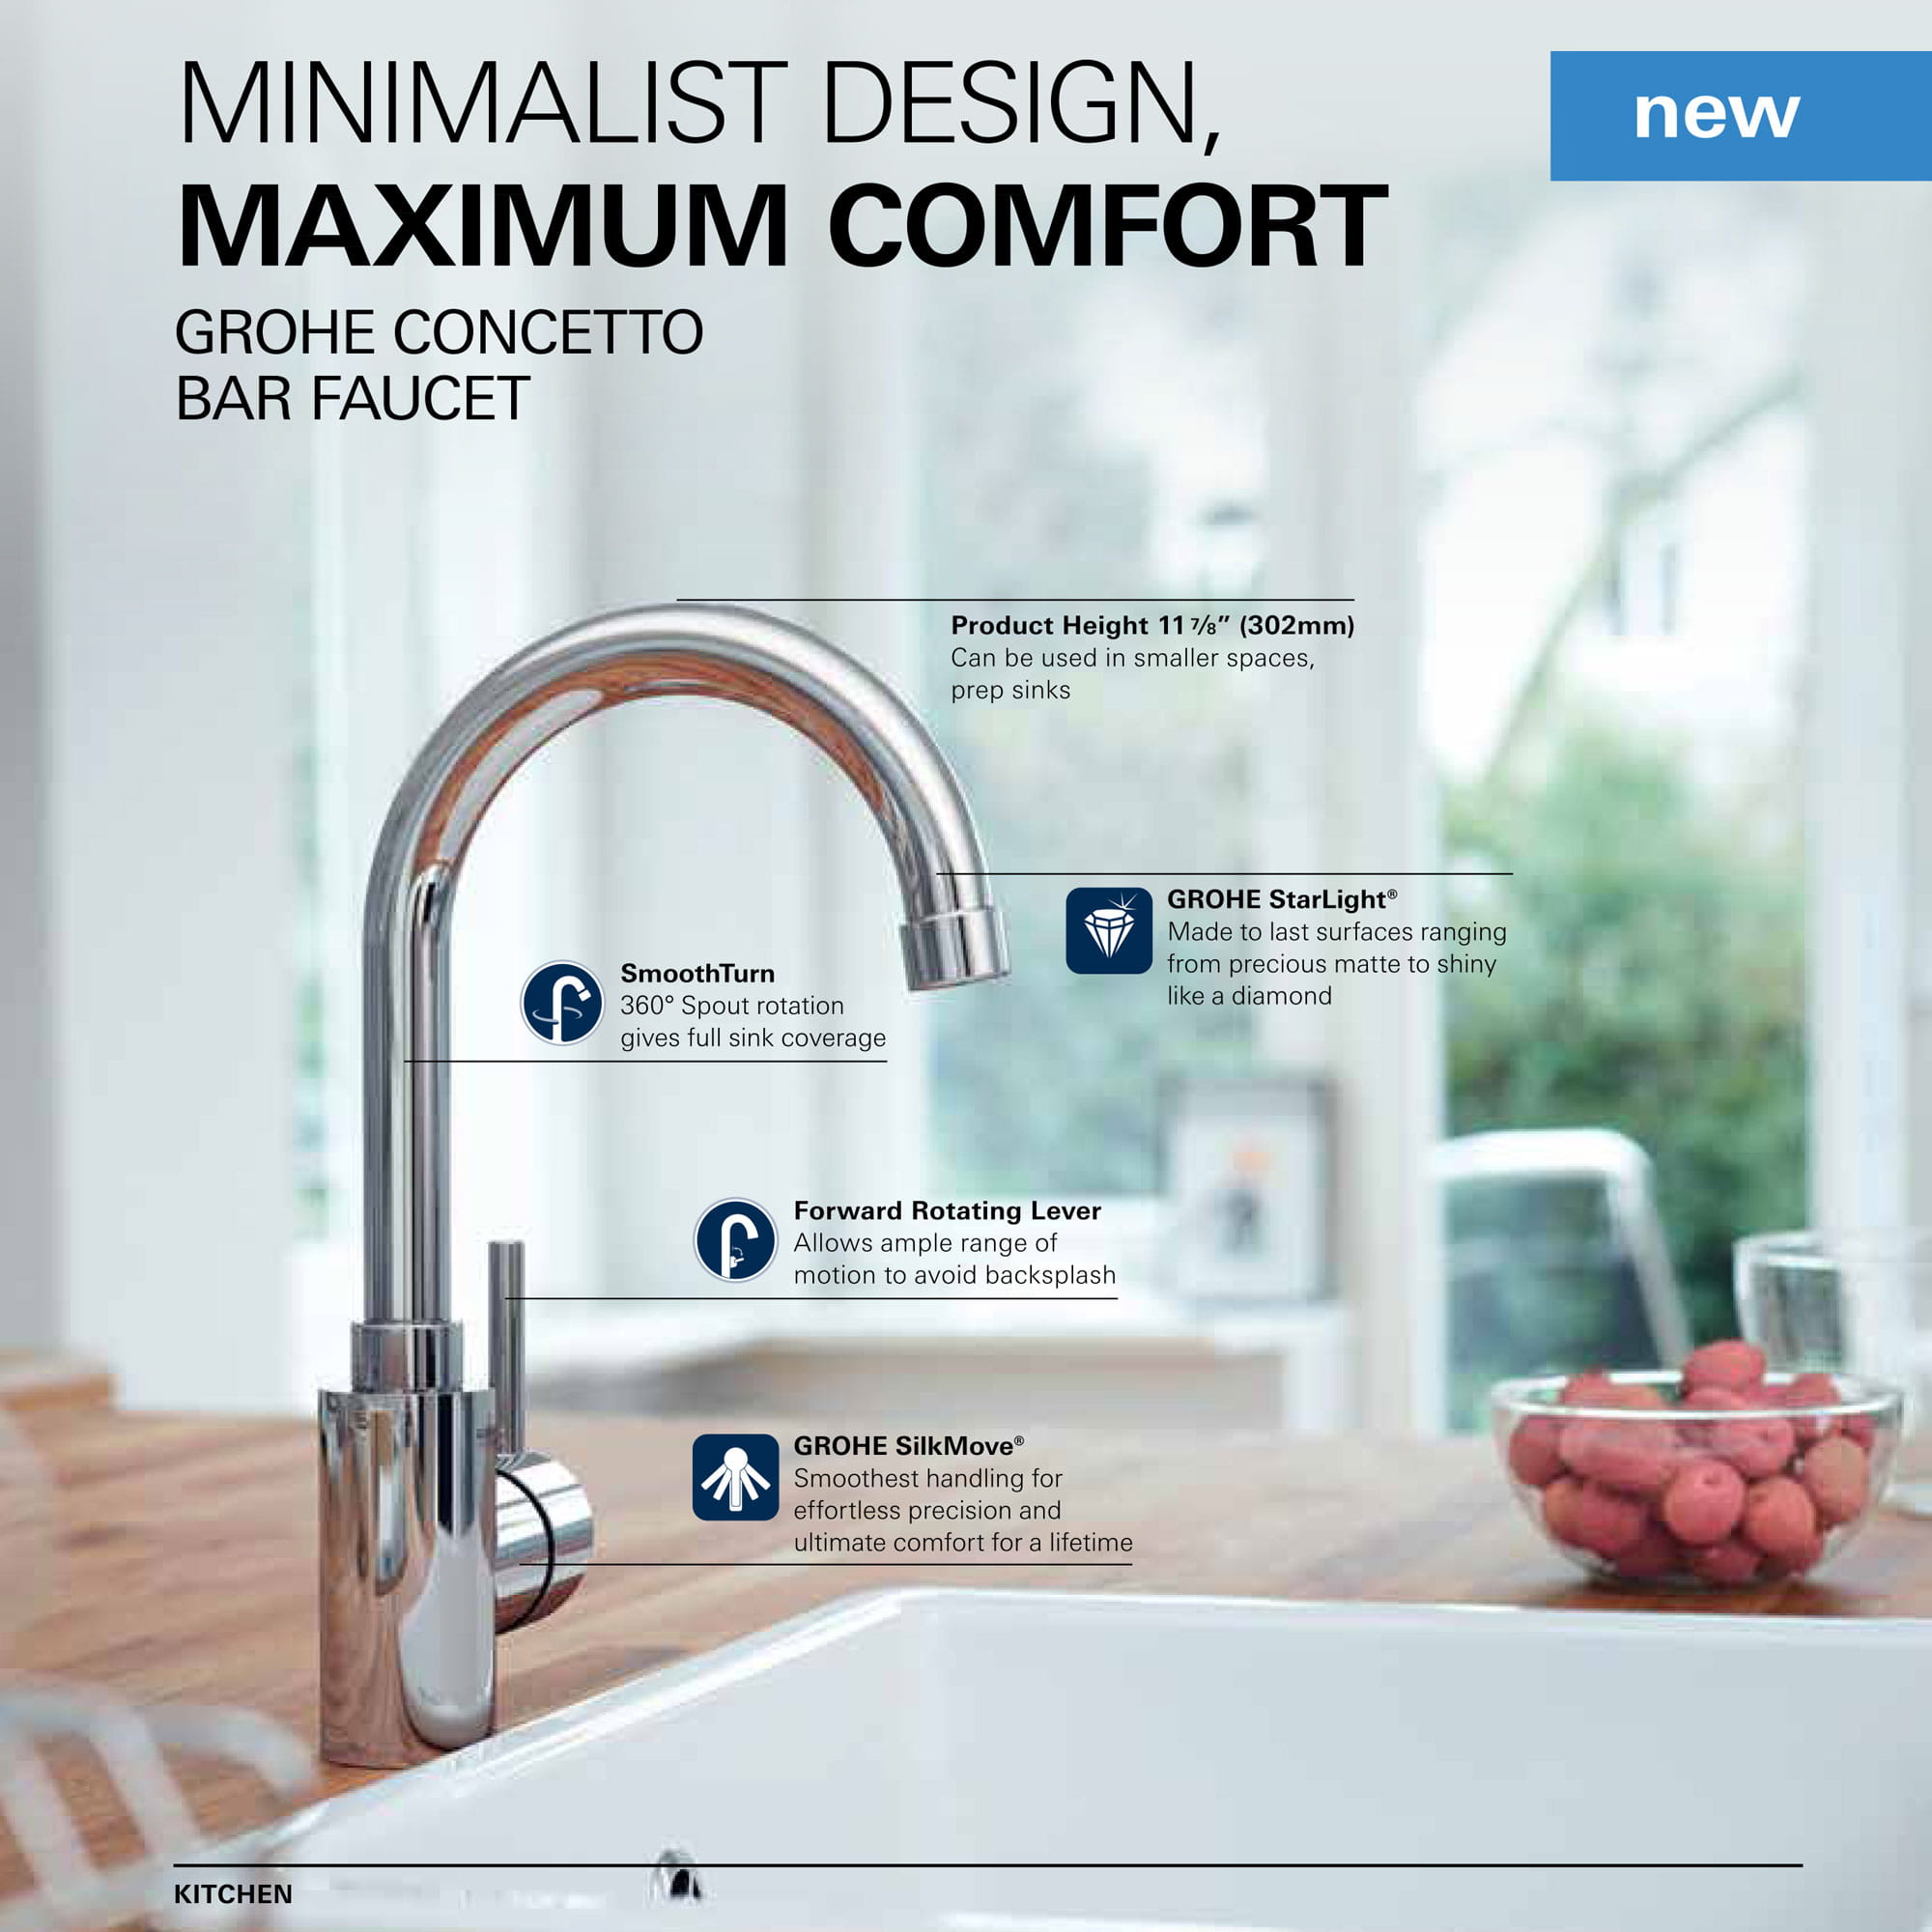 sink with faucet with text that includes specs, and cup of fruit on the side of table